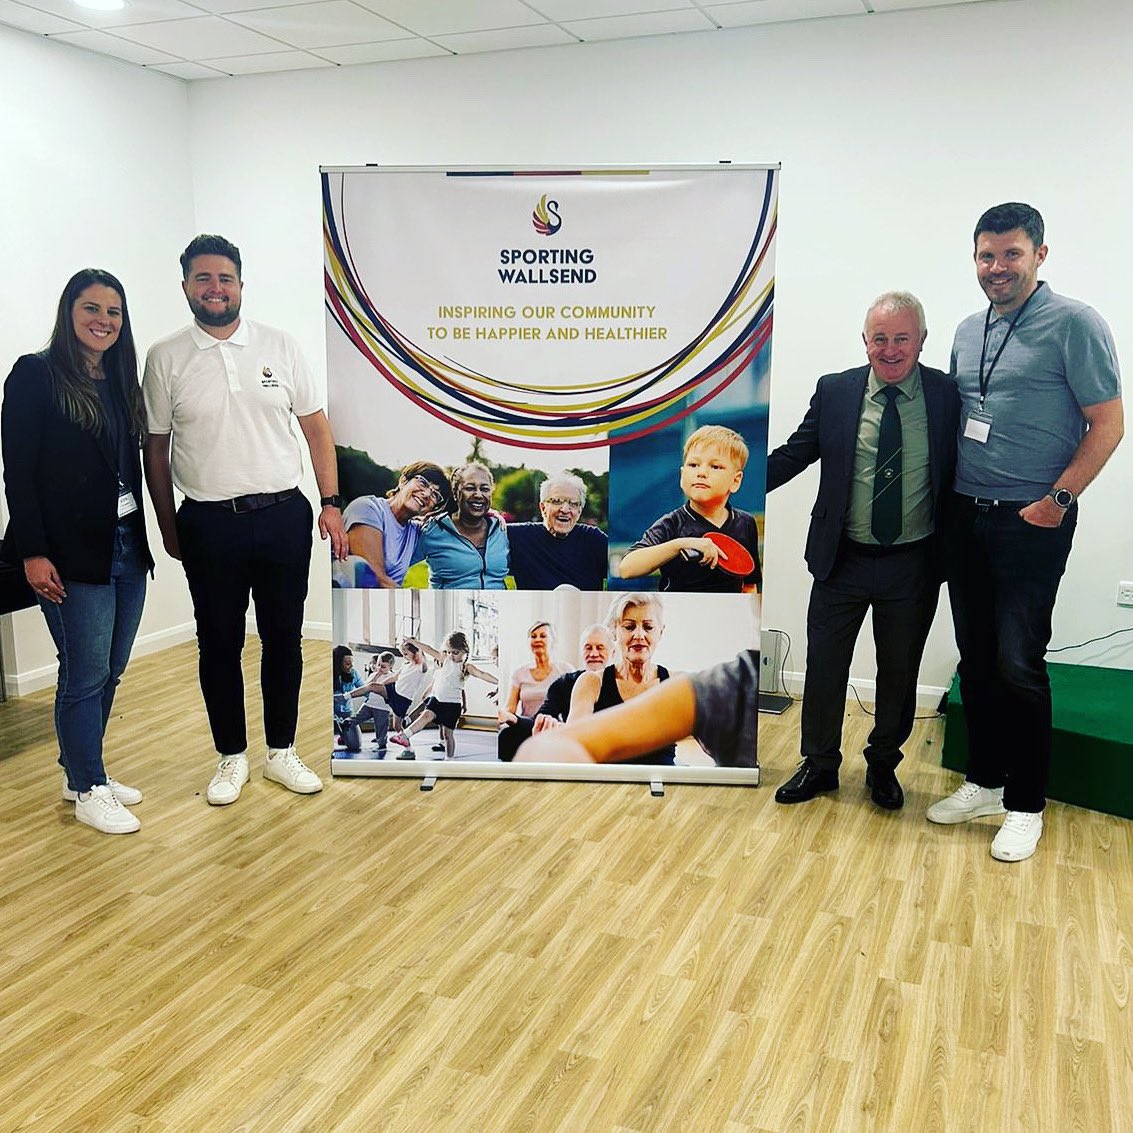 Yesterday was a very special day for our partner @WallsendBoysFC as they opened their brand new community hub! Our trustees Kay & Graeme were honoured to be there for the ribbon cutting. ✂️ This is a really exciting chapter and we can’t wait to see the space come to life. ⭐️